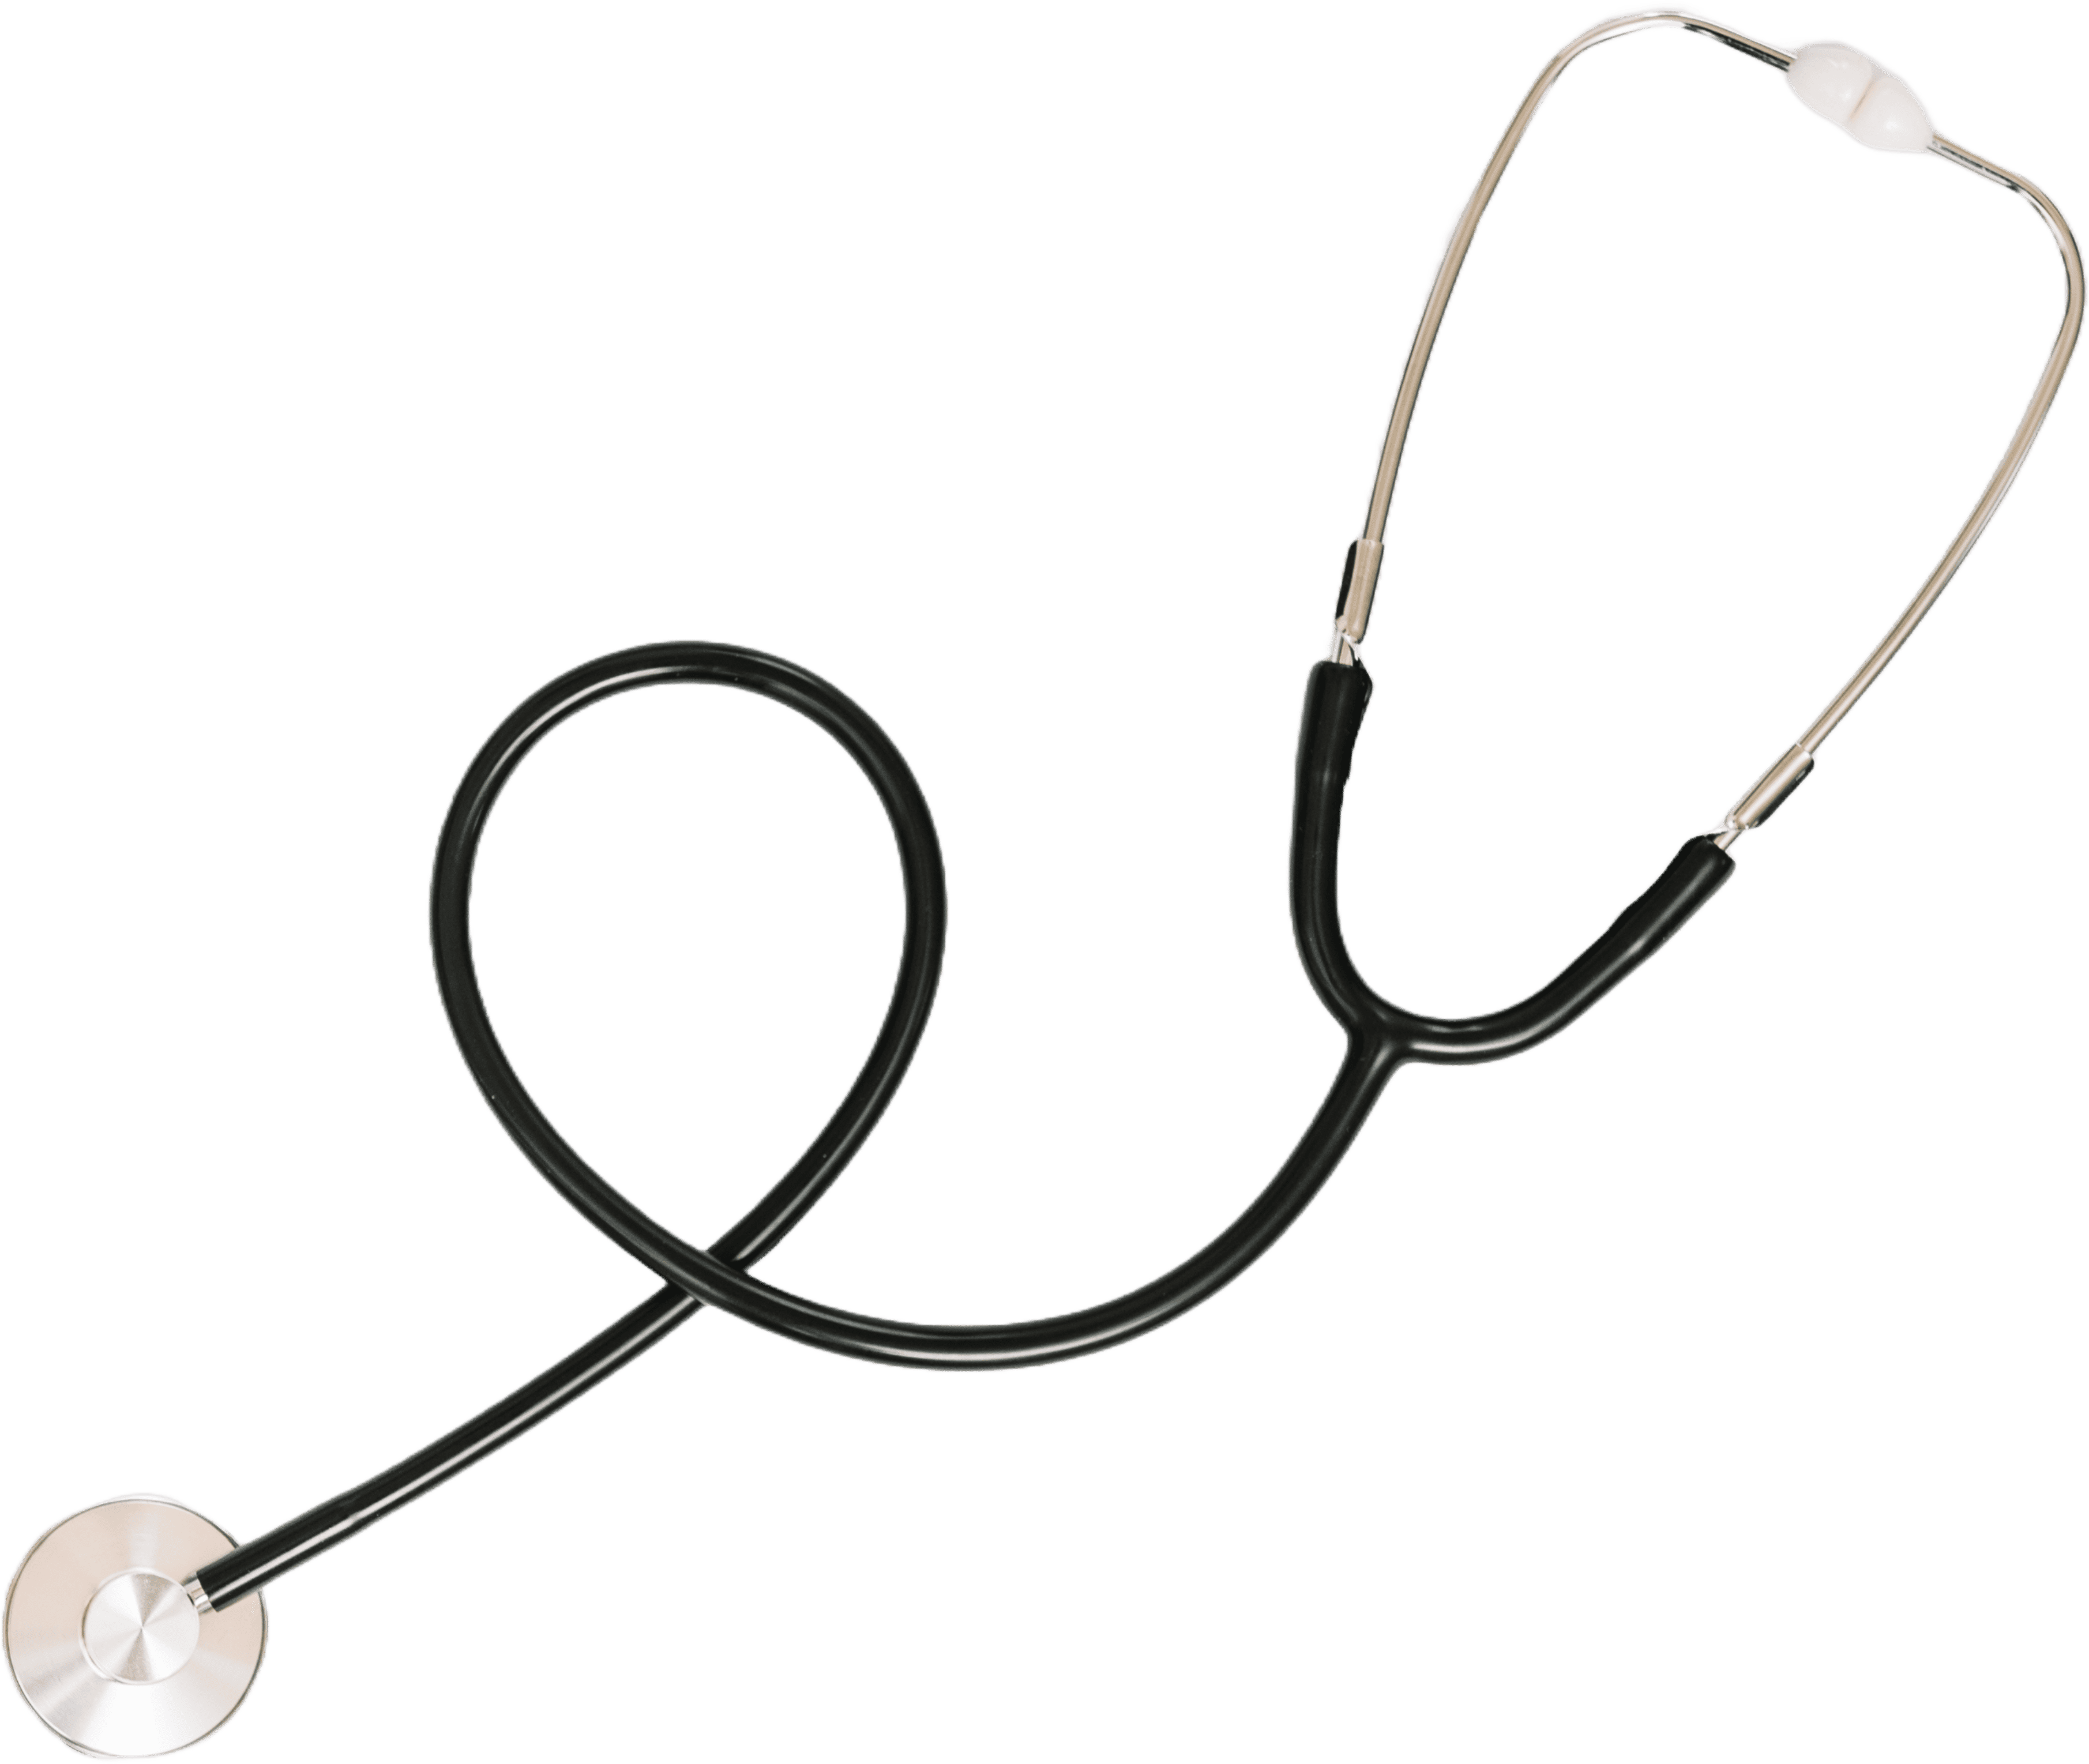 A black stethoscope with silver accents, featuring a chest piece and ear tips, coiled in a loop on a white background—an essential tool for Primary Care.